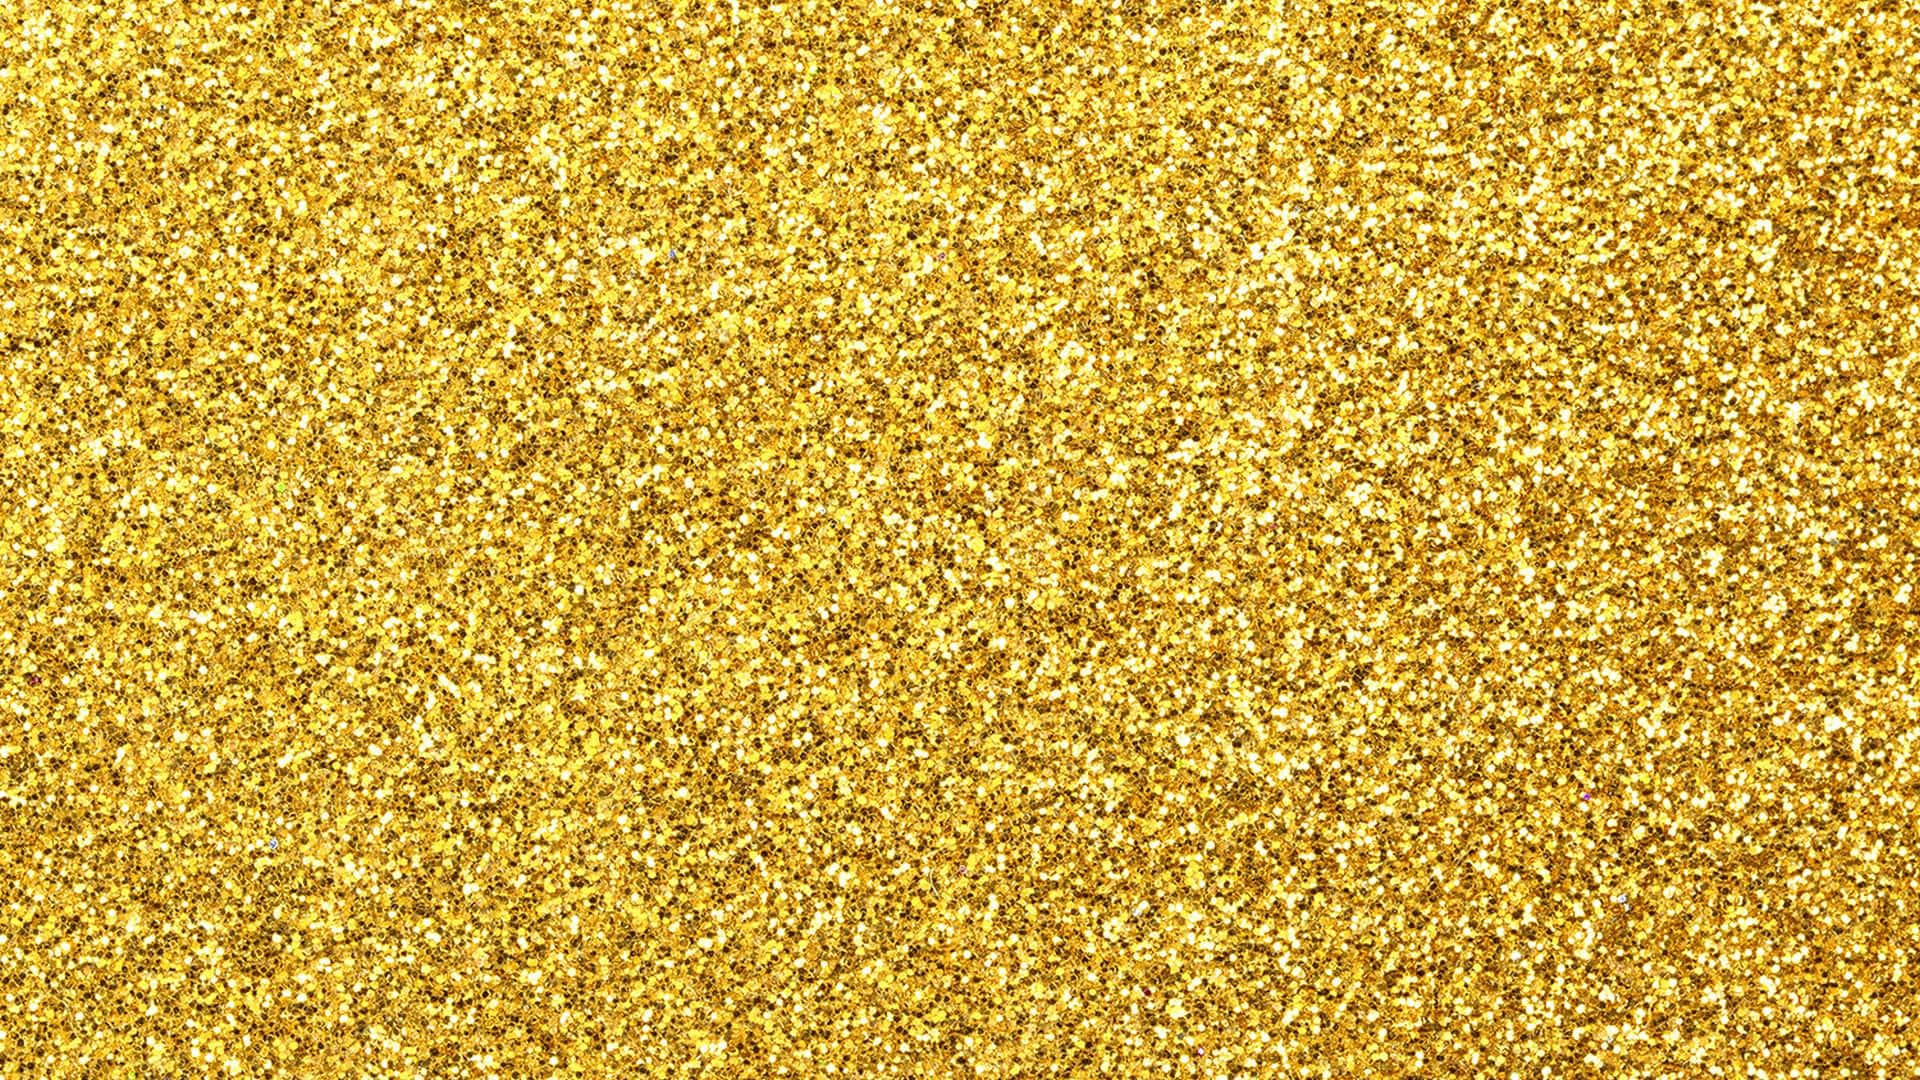 Download Brighten up any room with this yellow glitter wallpaper! Wallpaper  